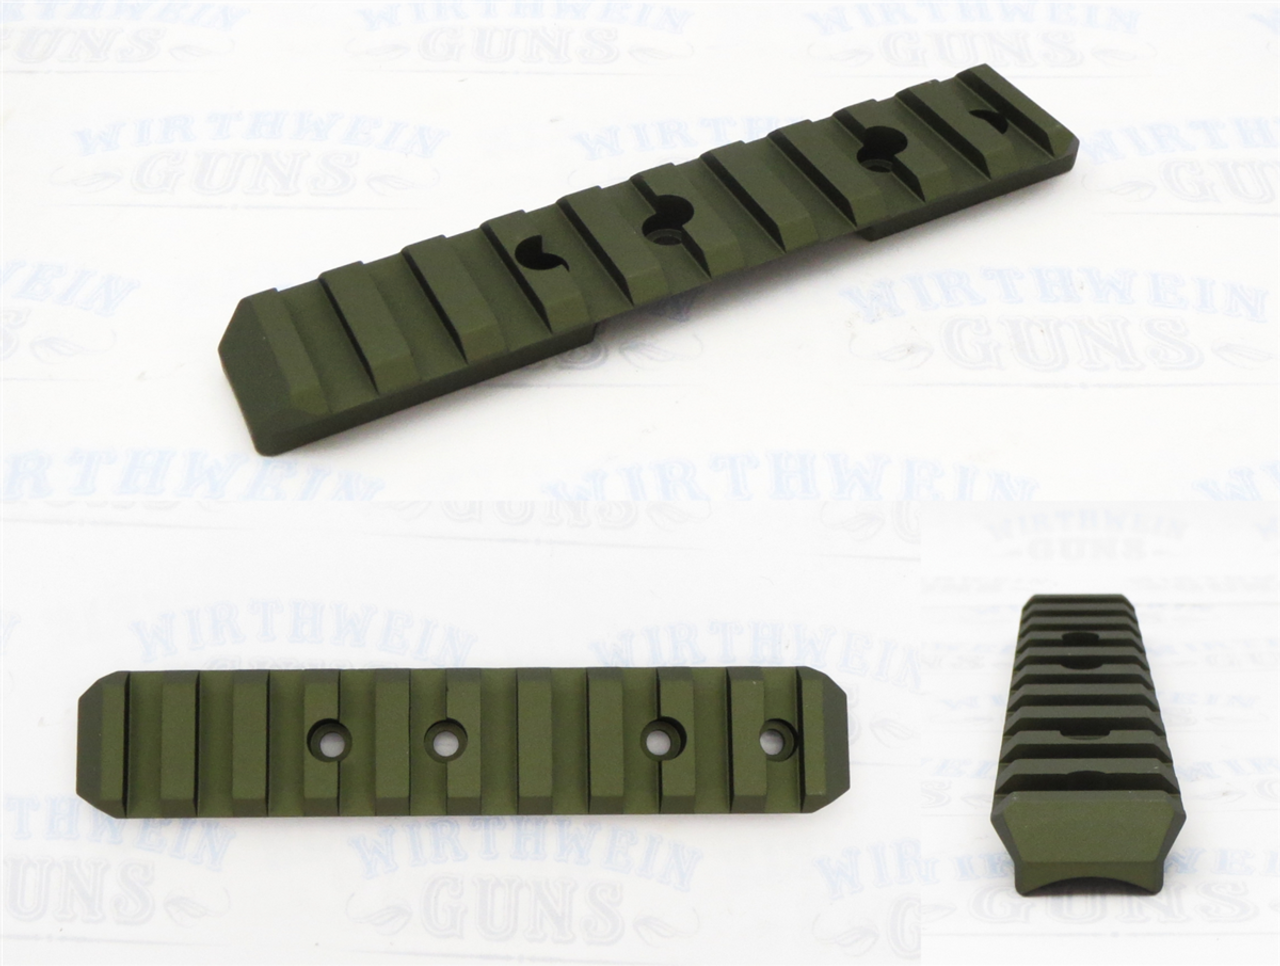 Ruger Reversible Picatinny Rail for ALL Mark Pistols and Tac-Sol Pac-Lite Matte OD Green